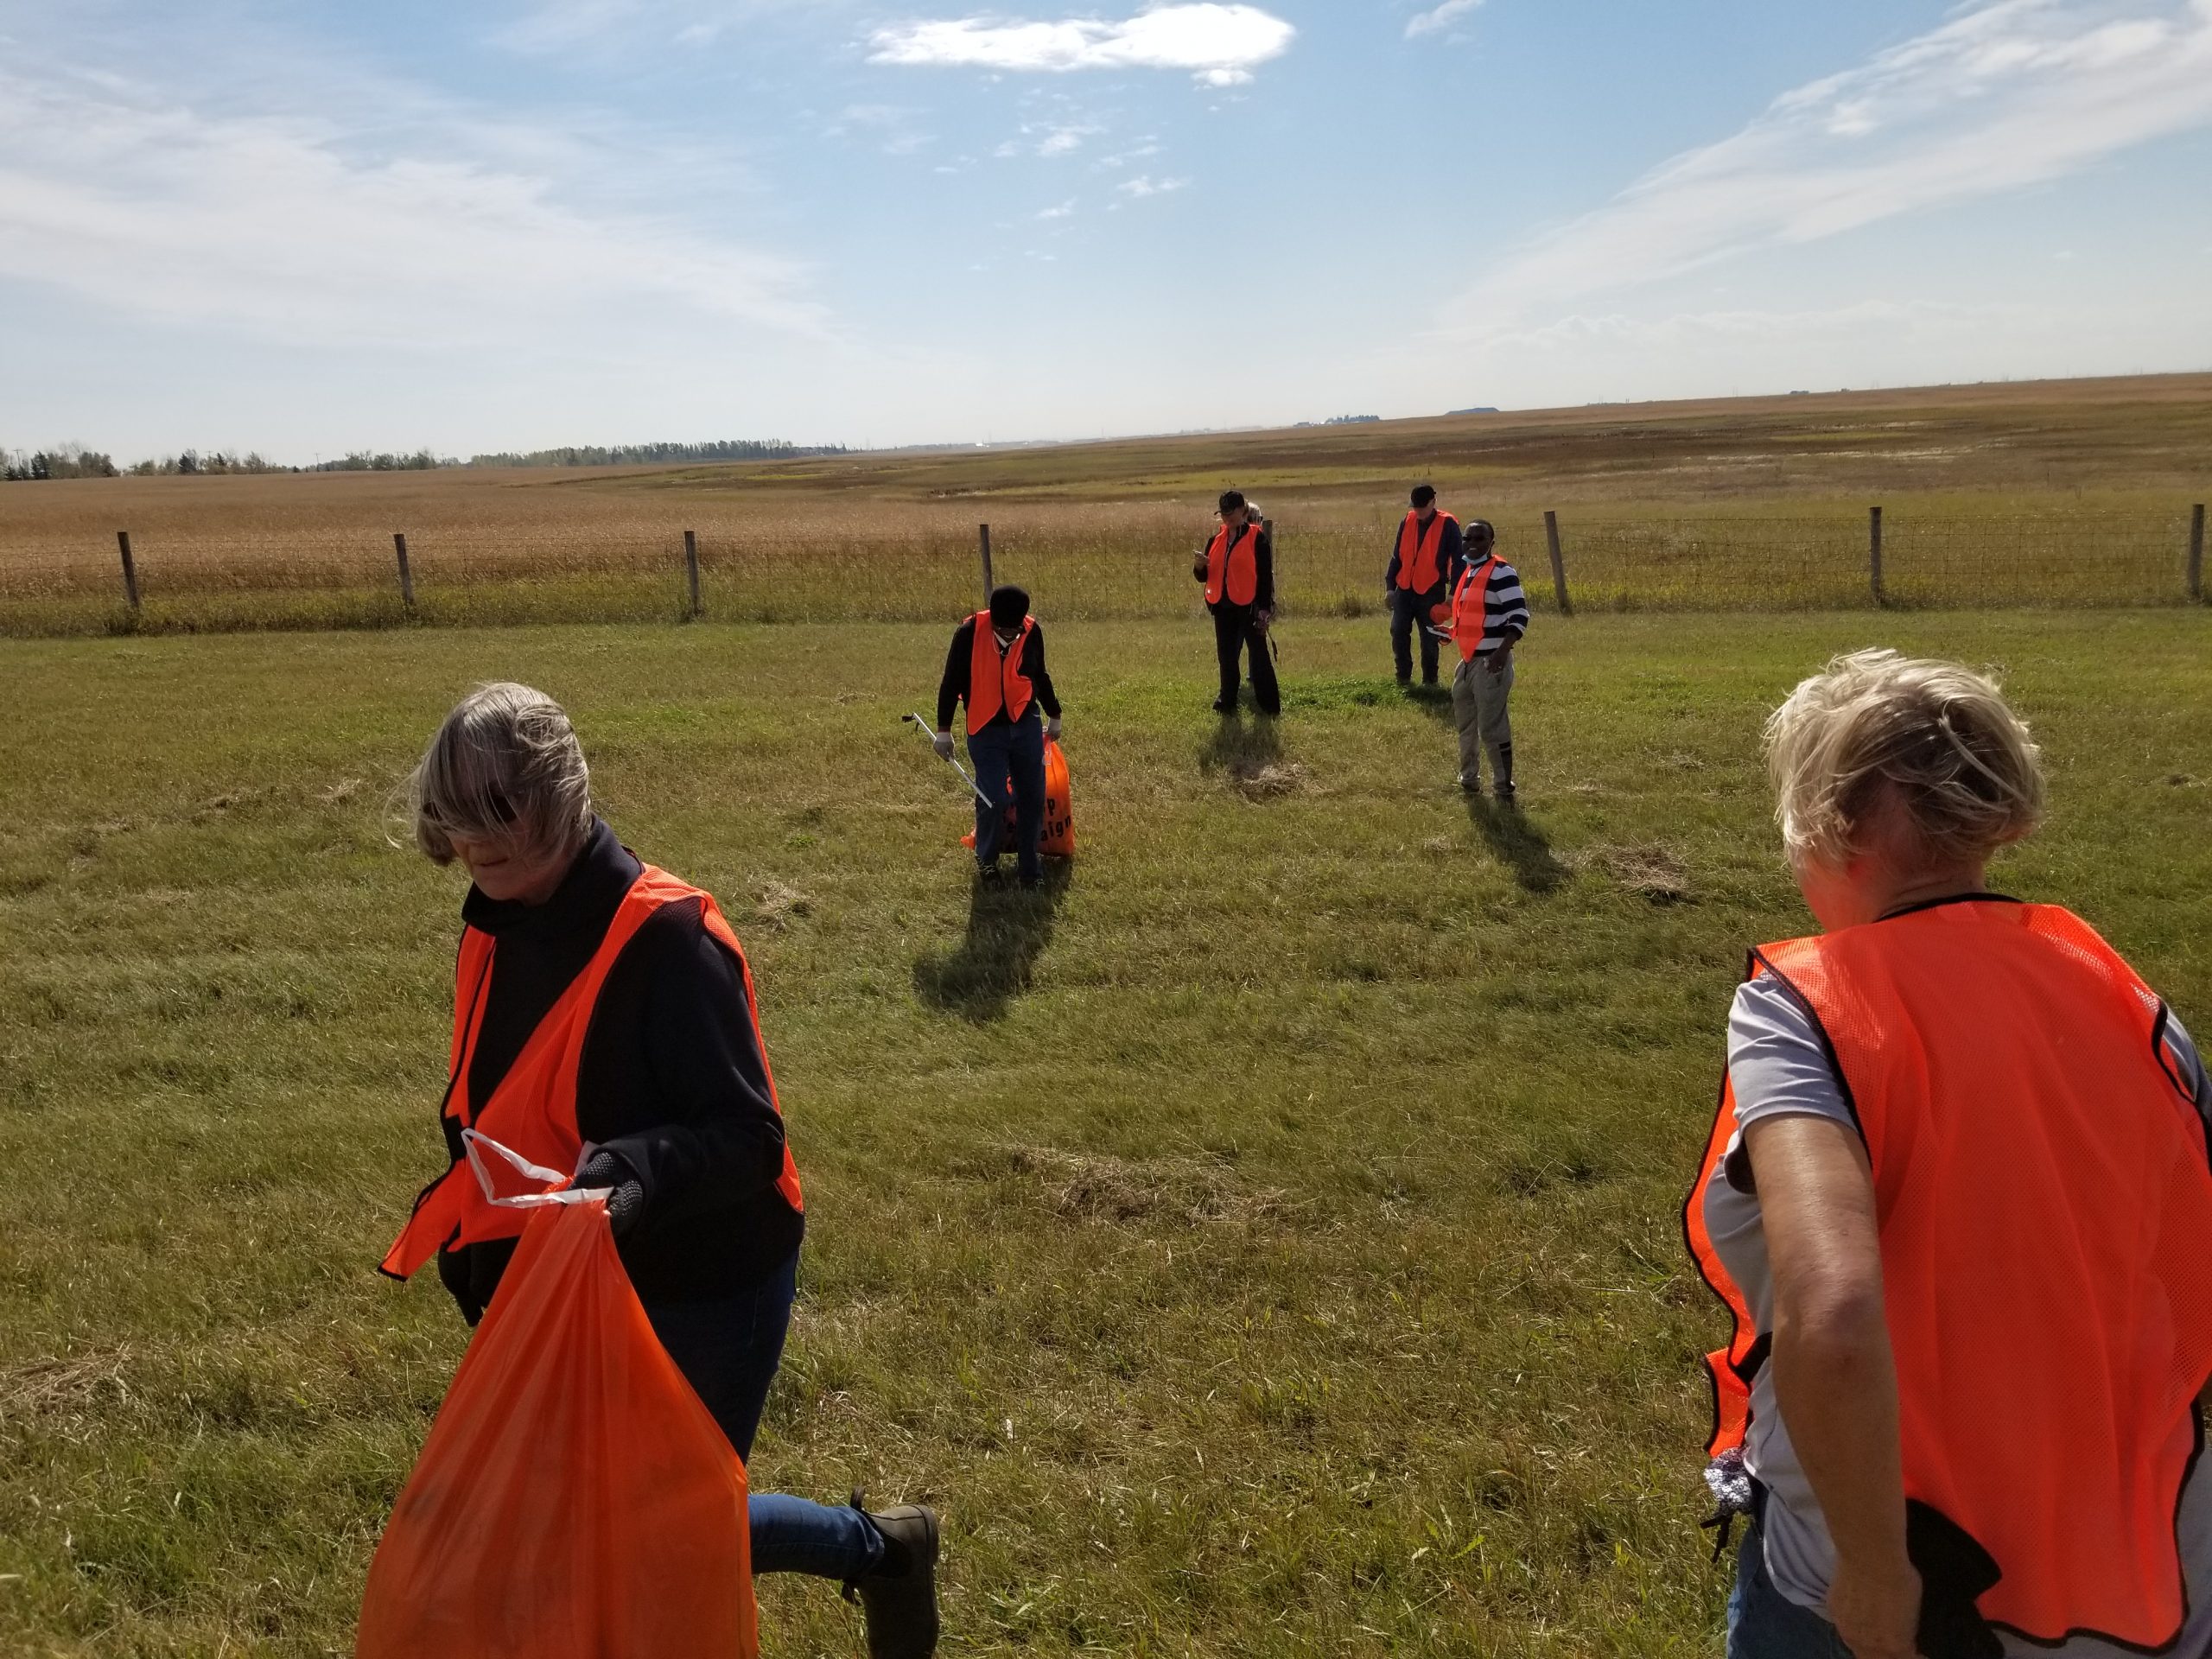 Annual Highway Cleanup – Sept 18, 2021